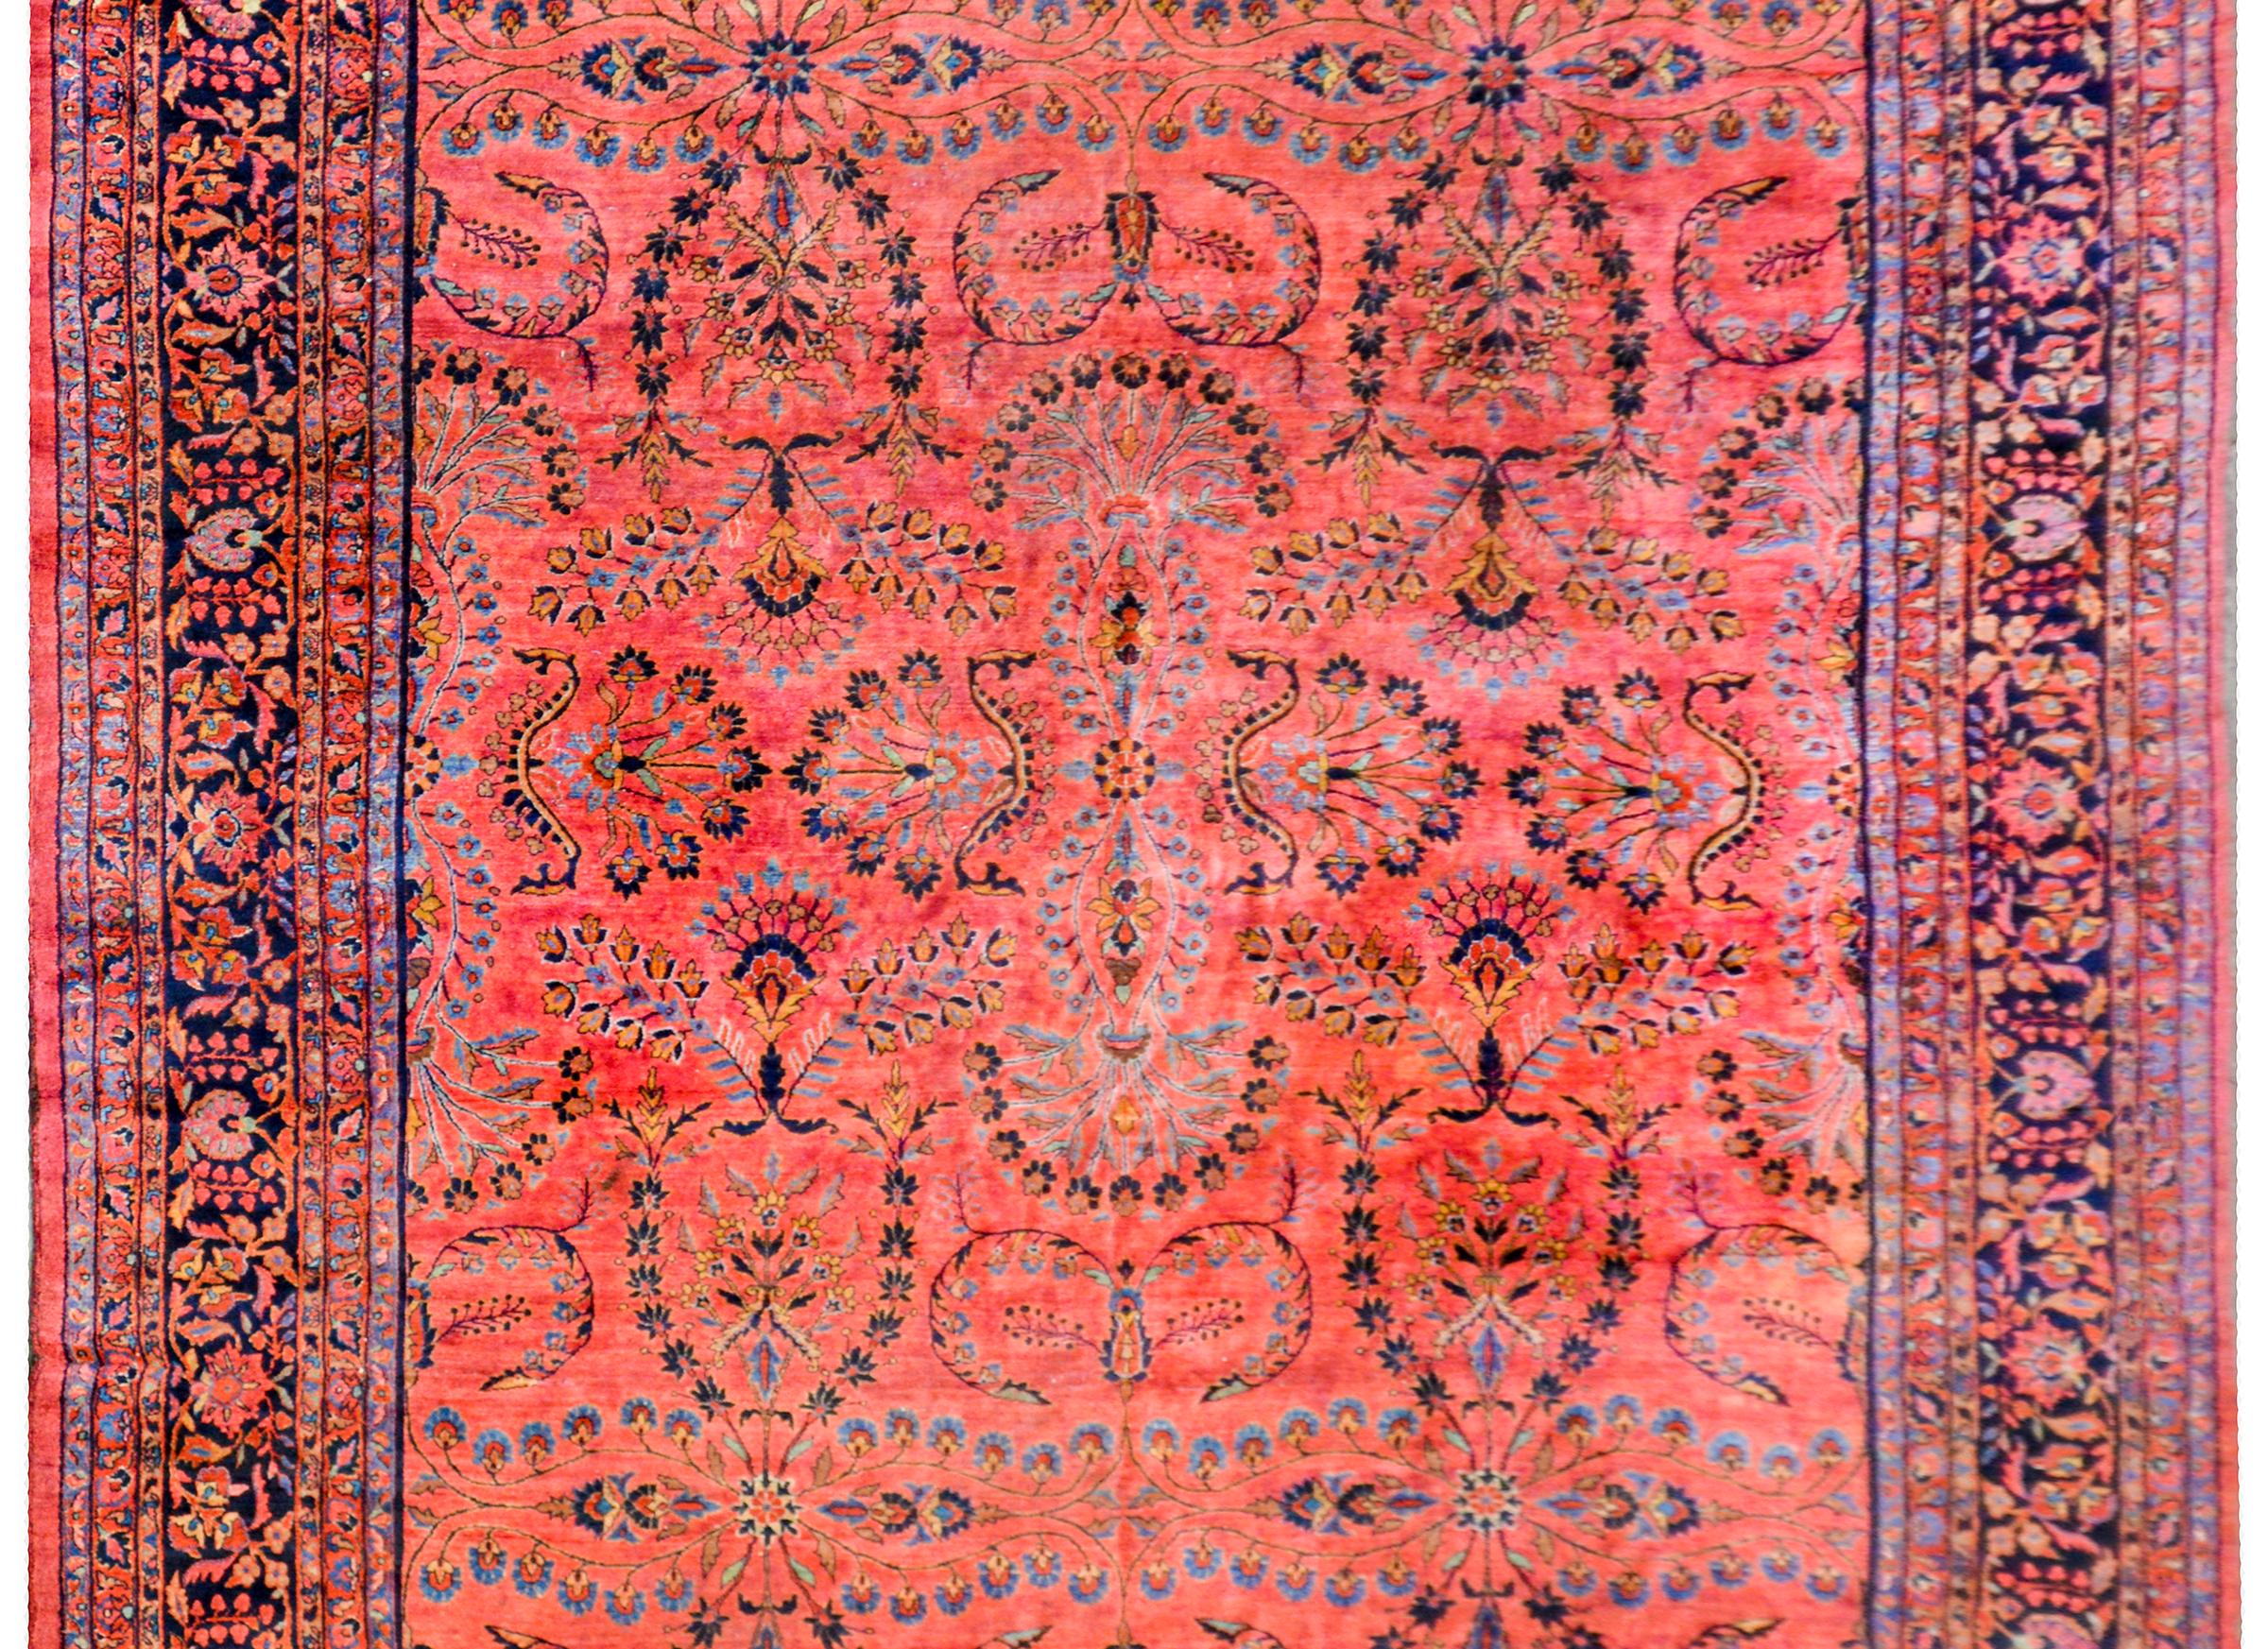 A majestic early 20th century Persian Sarouk Mohajeran rug with a large-scale mirrored floral pattern with myriad flowers and vines woven in light and dark indigo, crimson, and orange, on a coral colored background. The border is beautiful with a